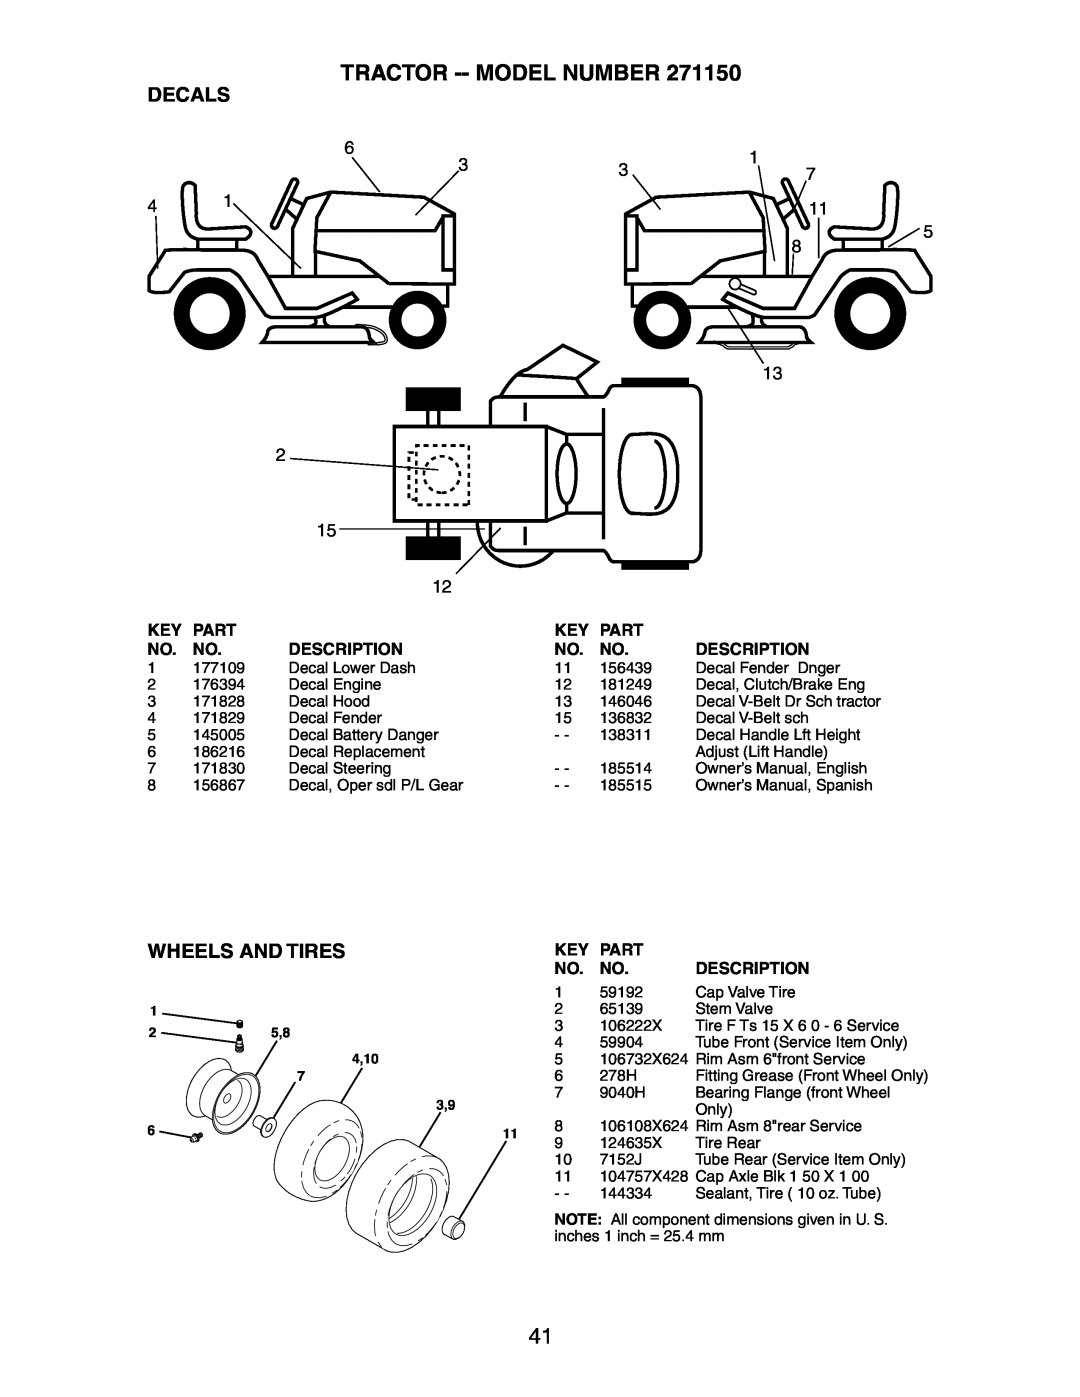 Poulan 271150 manual Decals, Wheels And Tires 